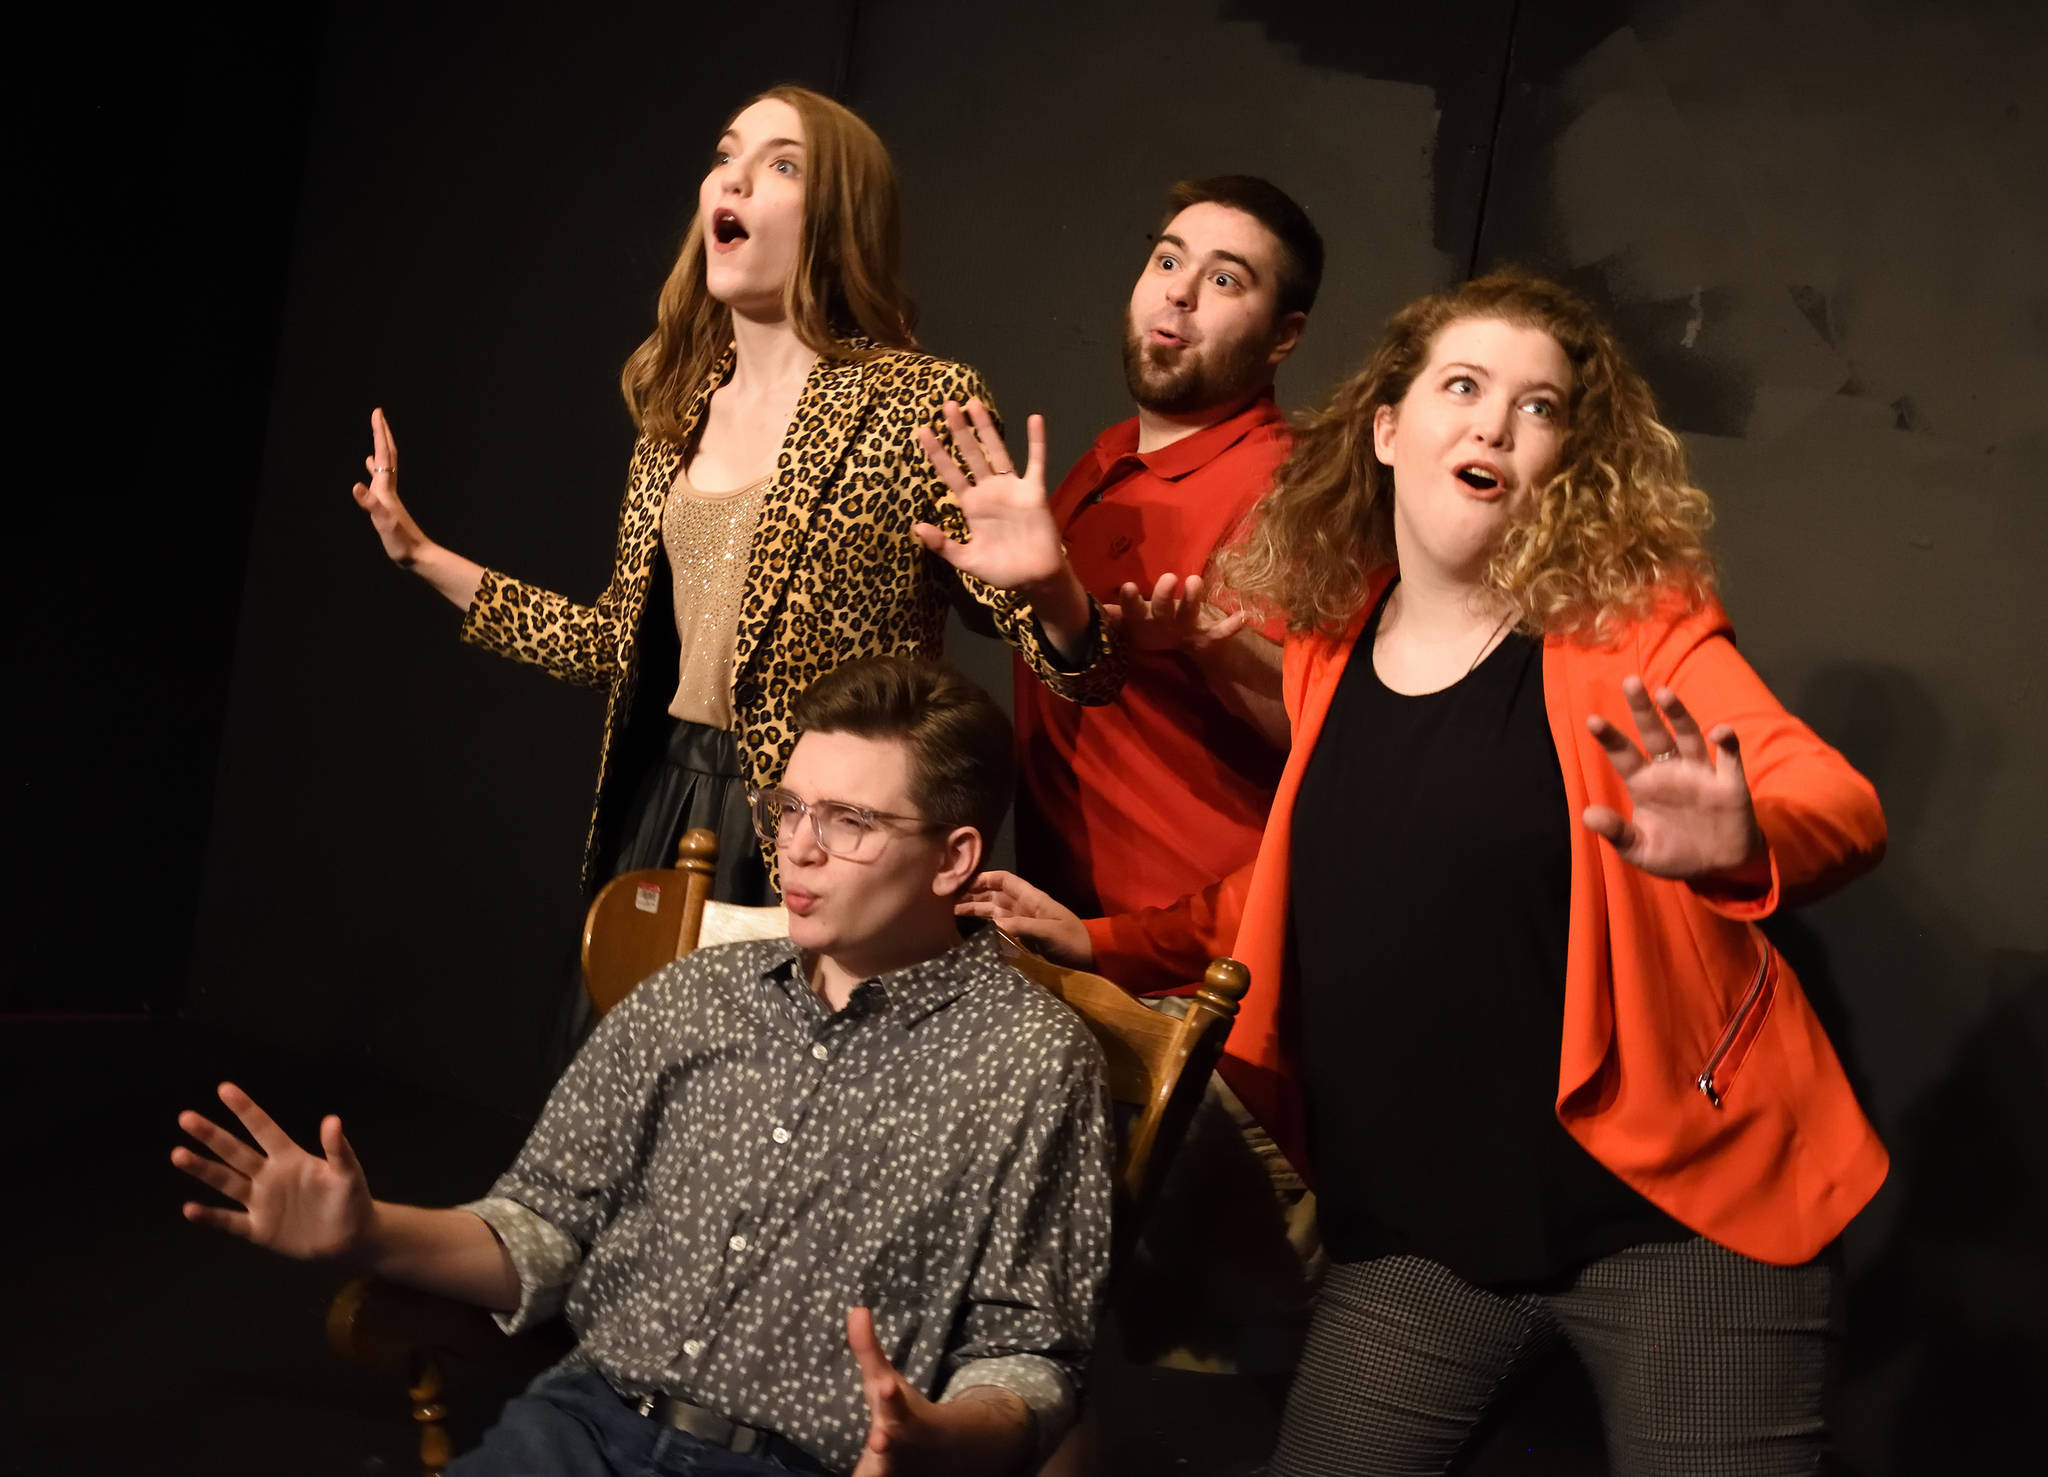 Alexis Jones (Susan), Nick Poling (Hunter), Nina Prentiss (Heidi) and Peter Davies (Jeff) belt out one of the songs in [title of show], running May 31-June 16 at the Red Curtain. (Courtesy Photo)